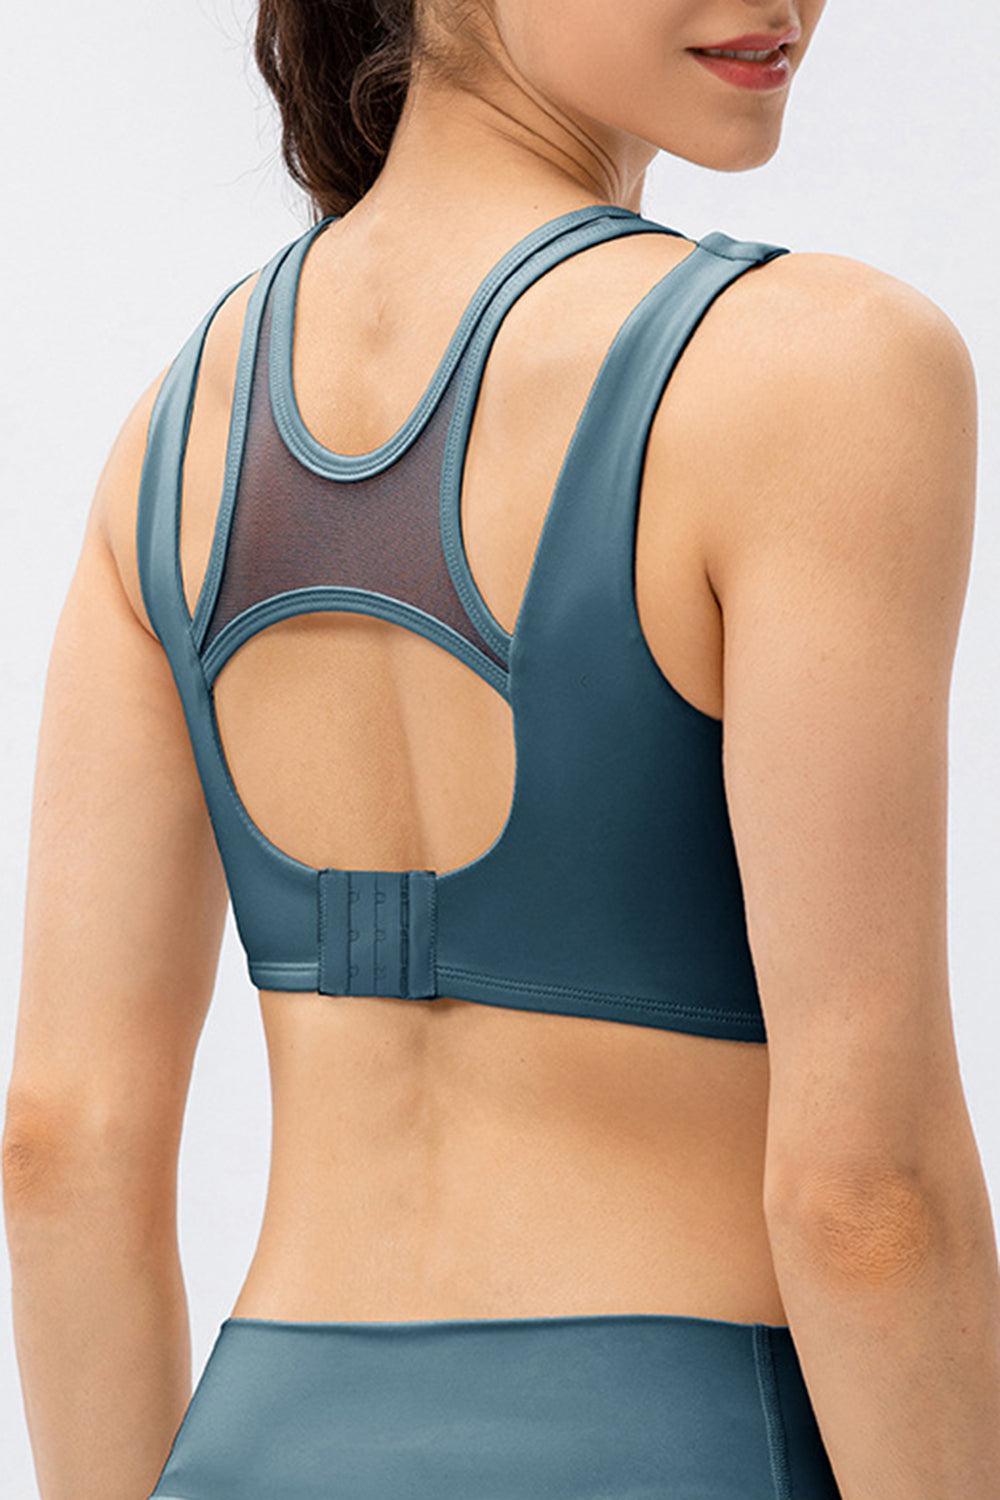 a woman wearing a sports bra with a mesh back